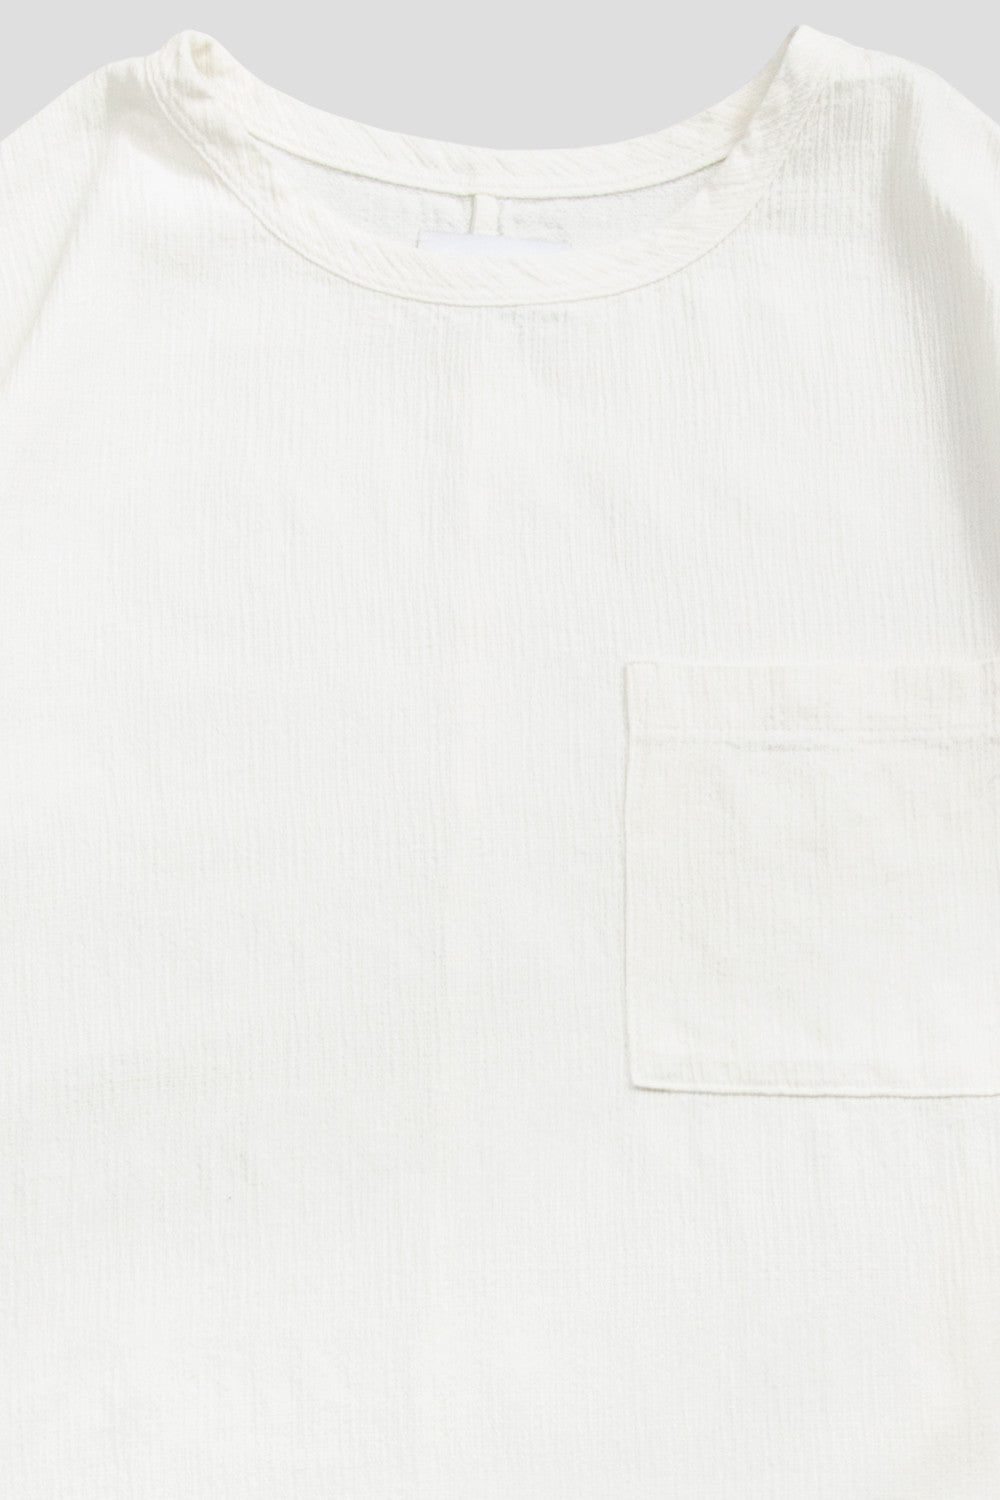 HYMNE TEXTURED WOVEN POCKET SS TSHIRT OFF WHITE - BLENDS